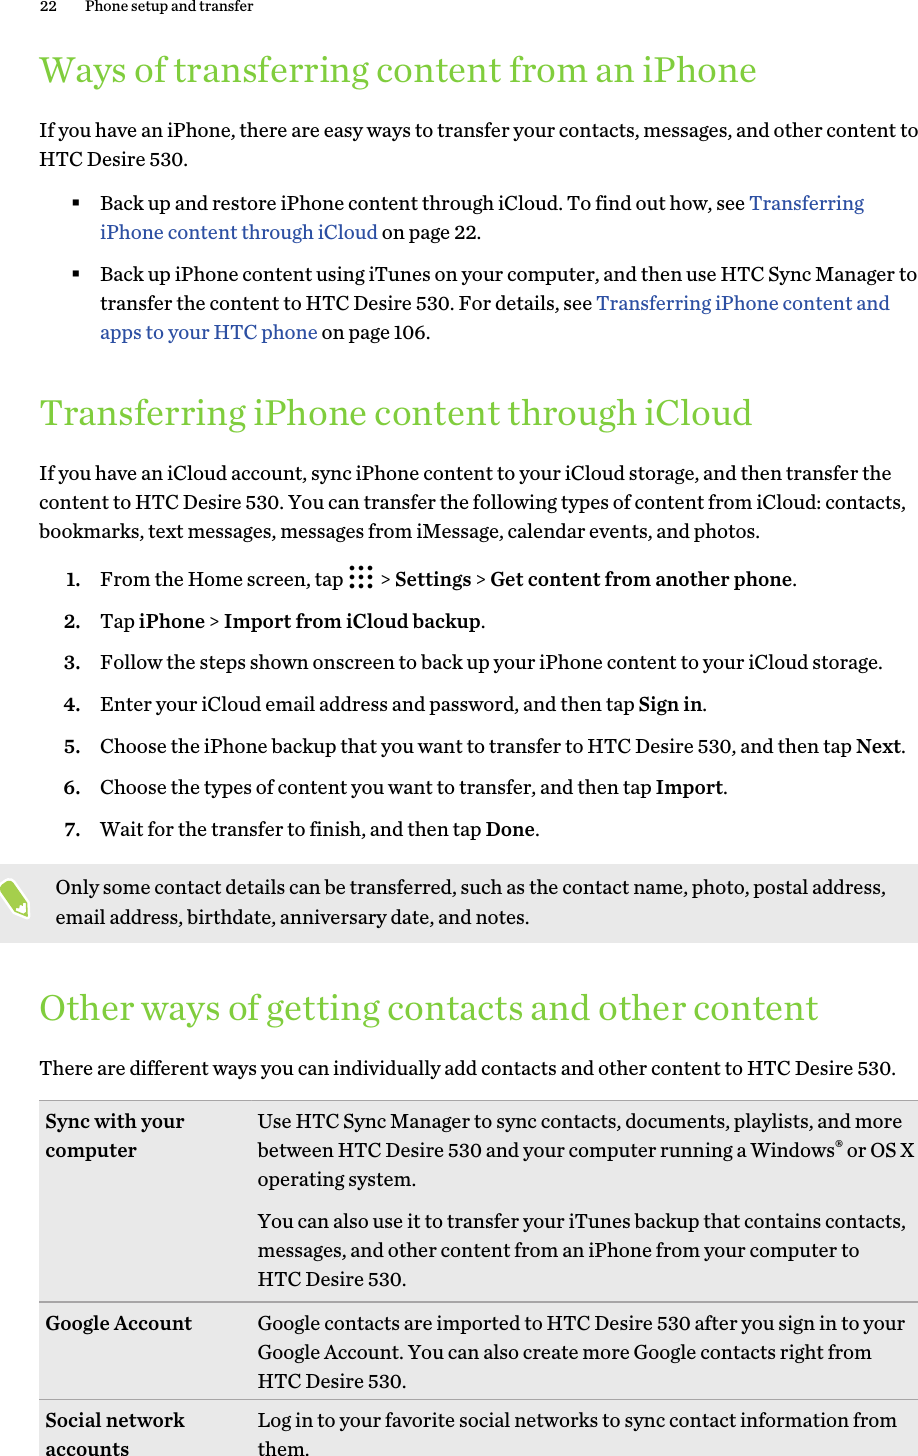 Ways of transferring content from an iPhoneIf you have an iPhone, there are easy ways to transfer your contacts, messages, and other content toHTC Desire 530.§Back up and restore iPhone content through iCloud. To find out how, see TransferringiPhone content through iCloud on page 22.§Back up iPhone content using iTunes on your computer, and then use HTC Sync Manager totransfer the content to HTC Desire 530. For details, see Transferring iPhone content andapps to your HTC phone on page 106.Transferring iPhone content through iCloudIf you have an iCloud account, sync iPhone content to your iCloud storage, and then transfer thecontent to HTC Desire 530. You can transfer the following types of content from iCloud: contacts,bookmarks, text messages, messages from iMessage, calendar events, and photos.1. From the Home screen, tap   &gt; Settings &gt; Get content from another phone.2. Tap iPhone &gt; Import from iCloud backup.3. Follow the steps shown onscreen to back up your iPhone content to your iCloud storage.4. Enter your iCloud email address and password, and then tap Sign in.5. Choose the iPhone backup that you want to transfer to HTC Desire 530, and then tap Next.6. Choose the types of content you want to transfer, and then tap Import.7. Wait for the transfer to finish, and then tap Done.Only some contact details can be transferred, such as the contact name, photo, postal address,email address, birthdate, anniversary date, and notes.Other ways of getting contacts and other contentThere are different ways you can individually add contacts and other content to HTC Desire 530.Sync with yourcomputer Use HTC Sync Manager to sync contacts, documents, playlists, and morebetween HTC Desire 530 and your computer running a Windows® or OS Xoperating system.You can also use it to transfer your iTunes backup that contains contacts,messages, and other content from an iPhone from your computer toHTC Desire 530.Google Account Google contacts are imported to HTC Desire 530 after you sign in to yourGoogle Account. You can also create more Google contacts right fromHTC Desire 530.Social networkaccounts Log in to your favorite social networks to sync contact information fromthem.22 Phone setup and transfer